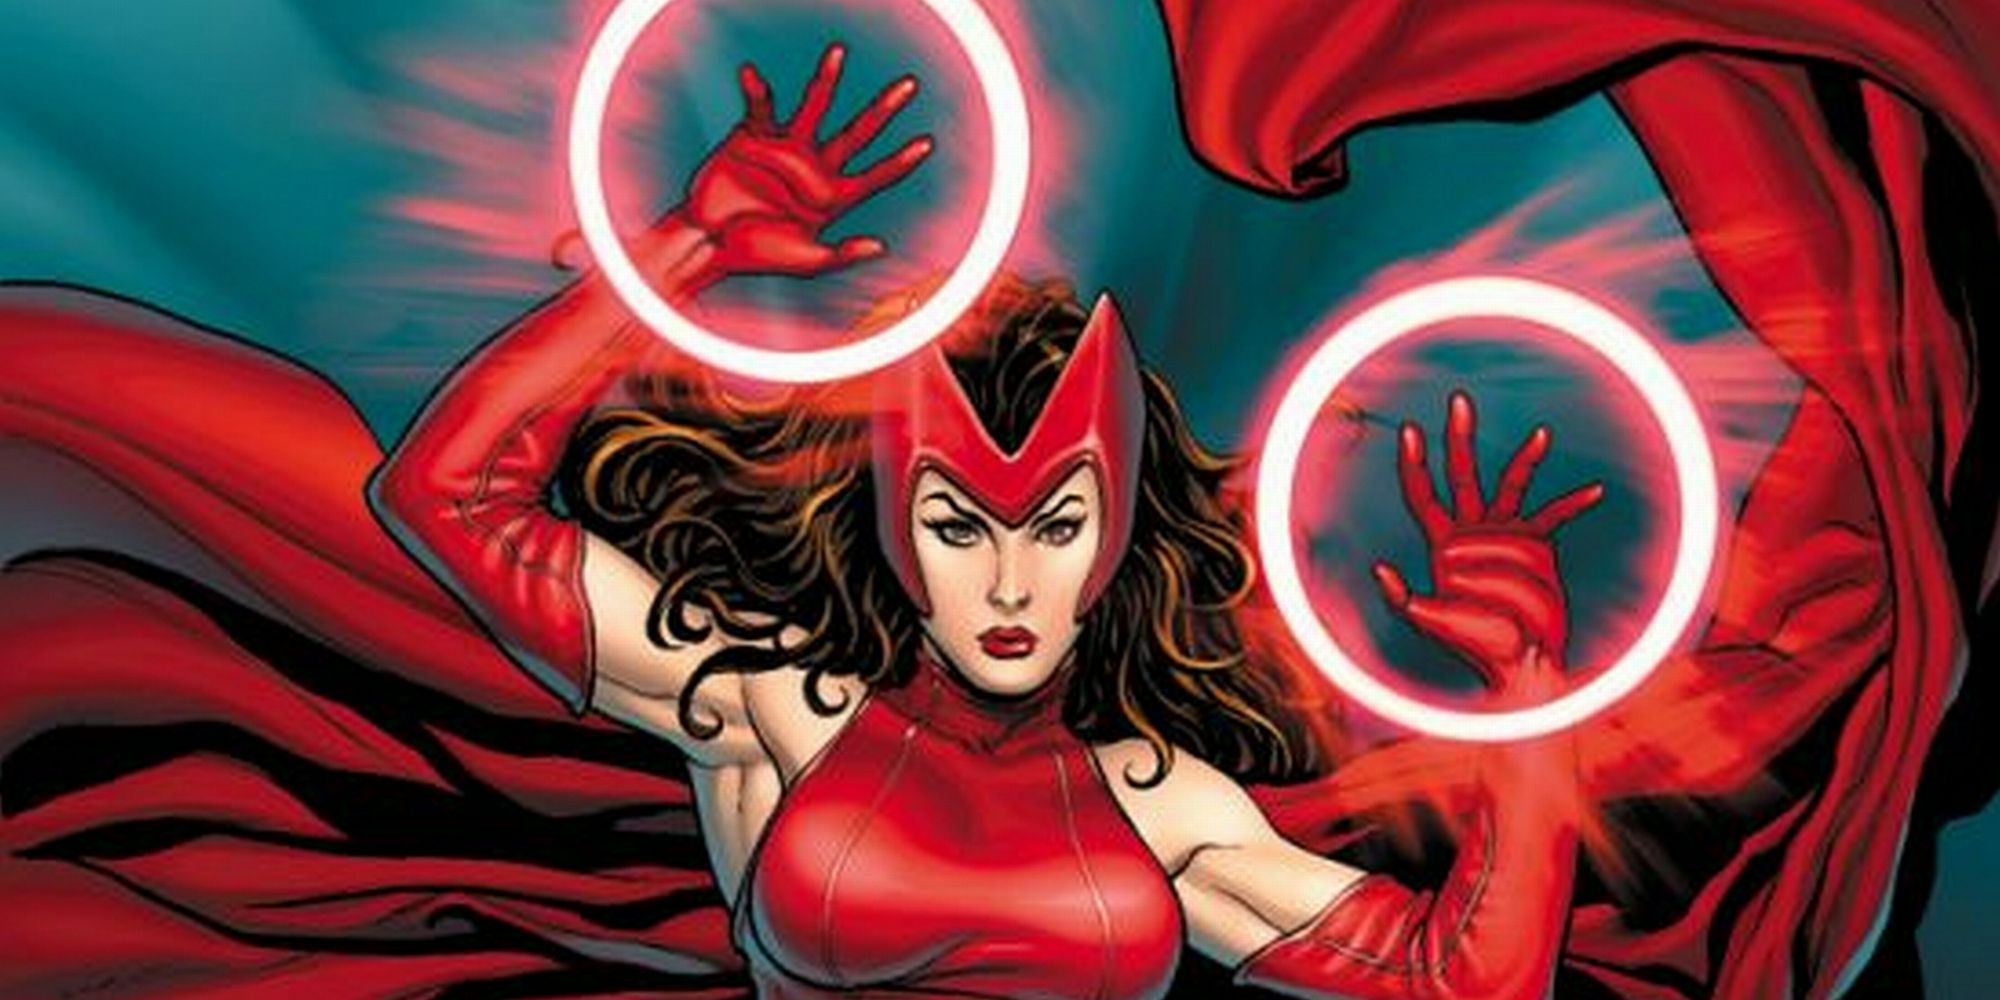 2. Marvel Nail Designs Featuring Scarlet Witch - wide 2